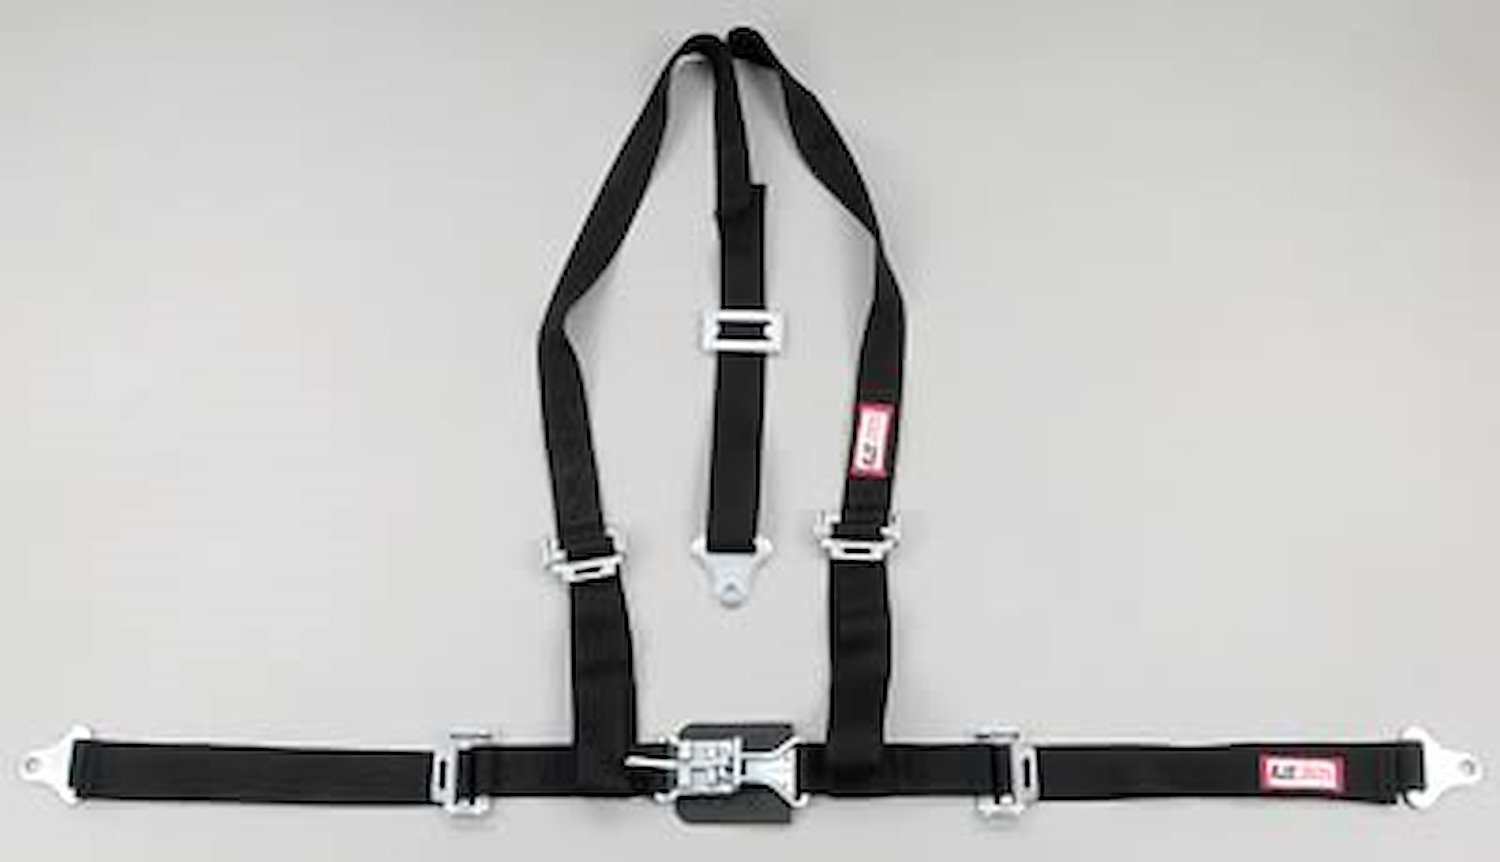 NON-SFI L&L HARNESS 2 PULL DOWN Lap Belt SEWN IN 2 S.H. V ROLL BAR Mount ALL SNAP ENDS PURPLE